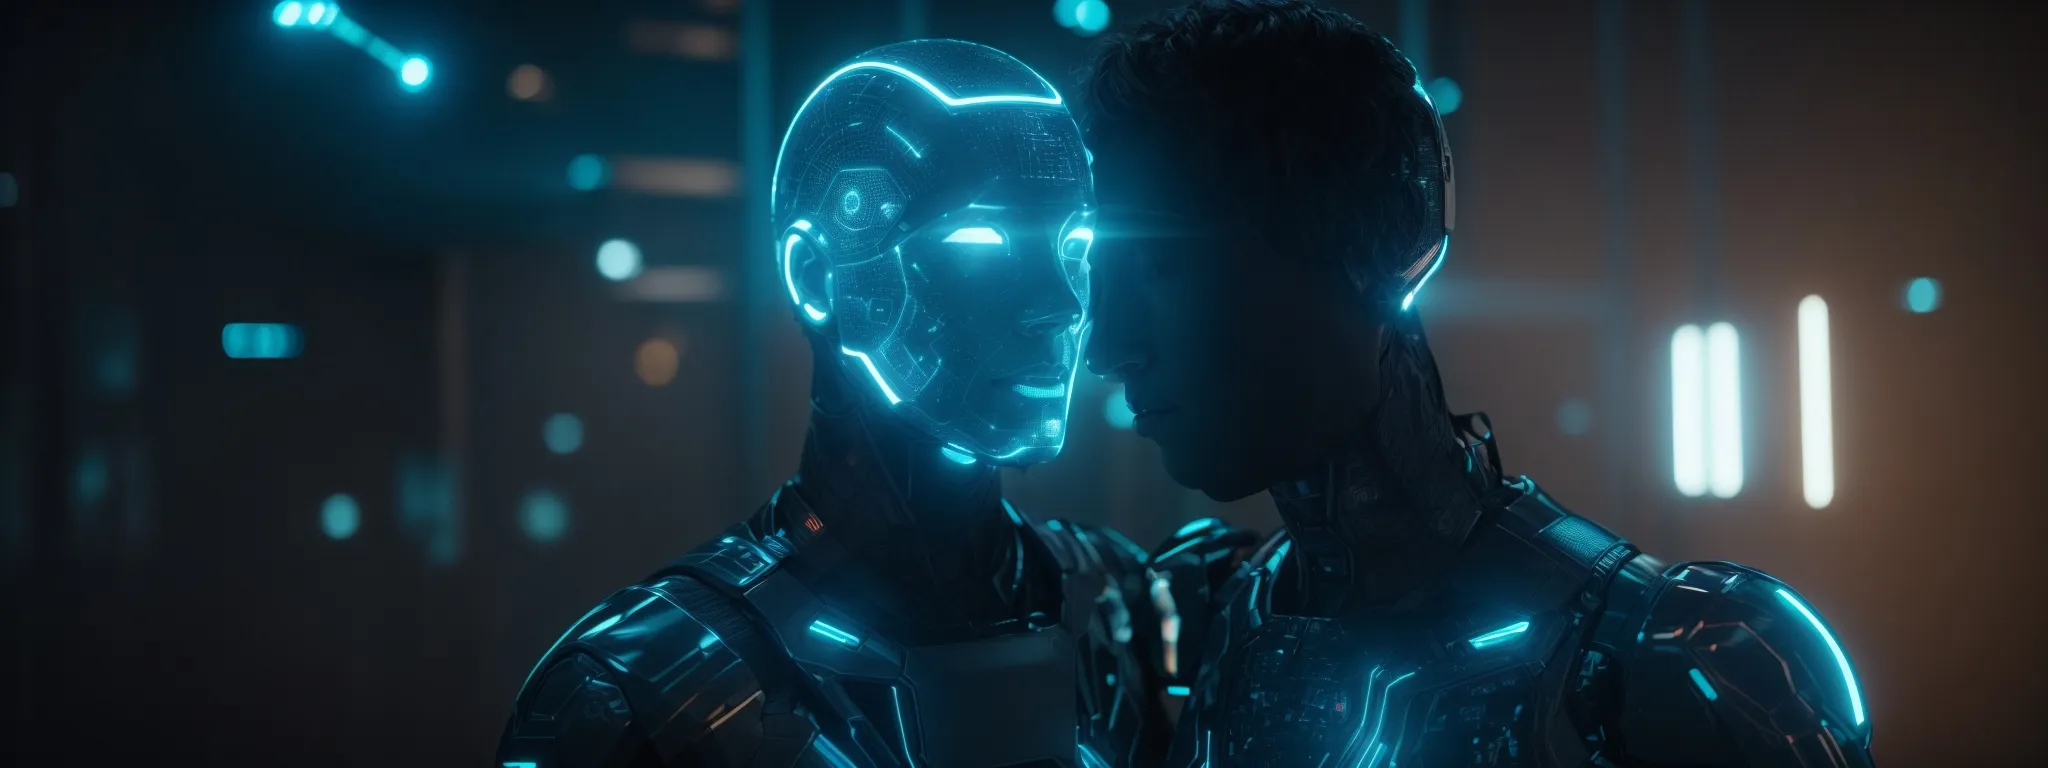 a glowing humanoid figure interacting with a holographic interface, symbolizing the fusion of artificial intelligence with content creation.